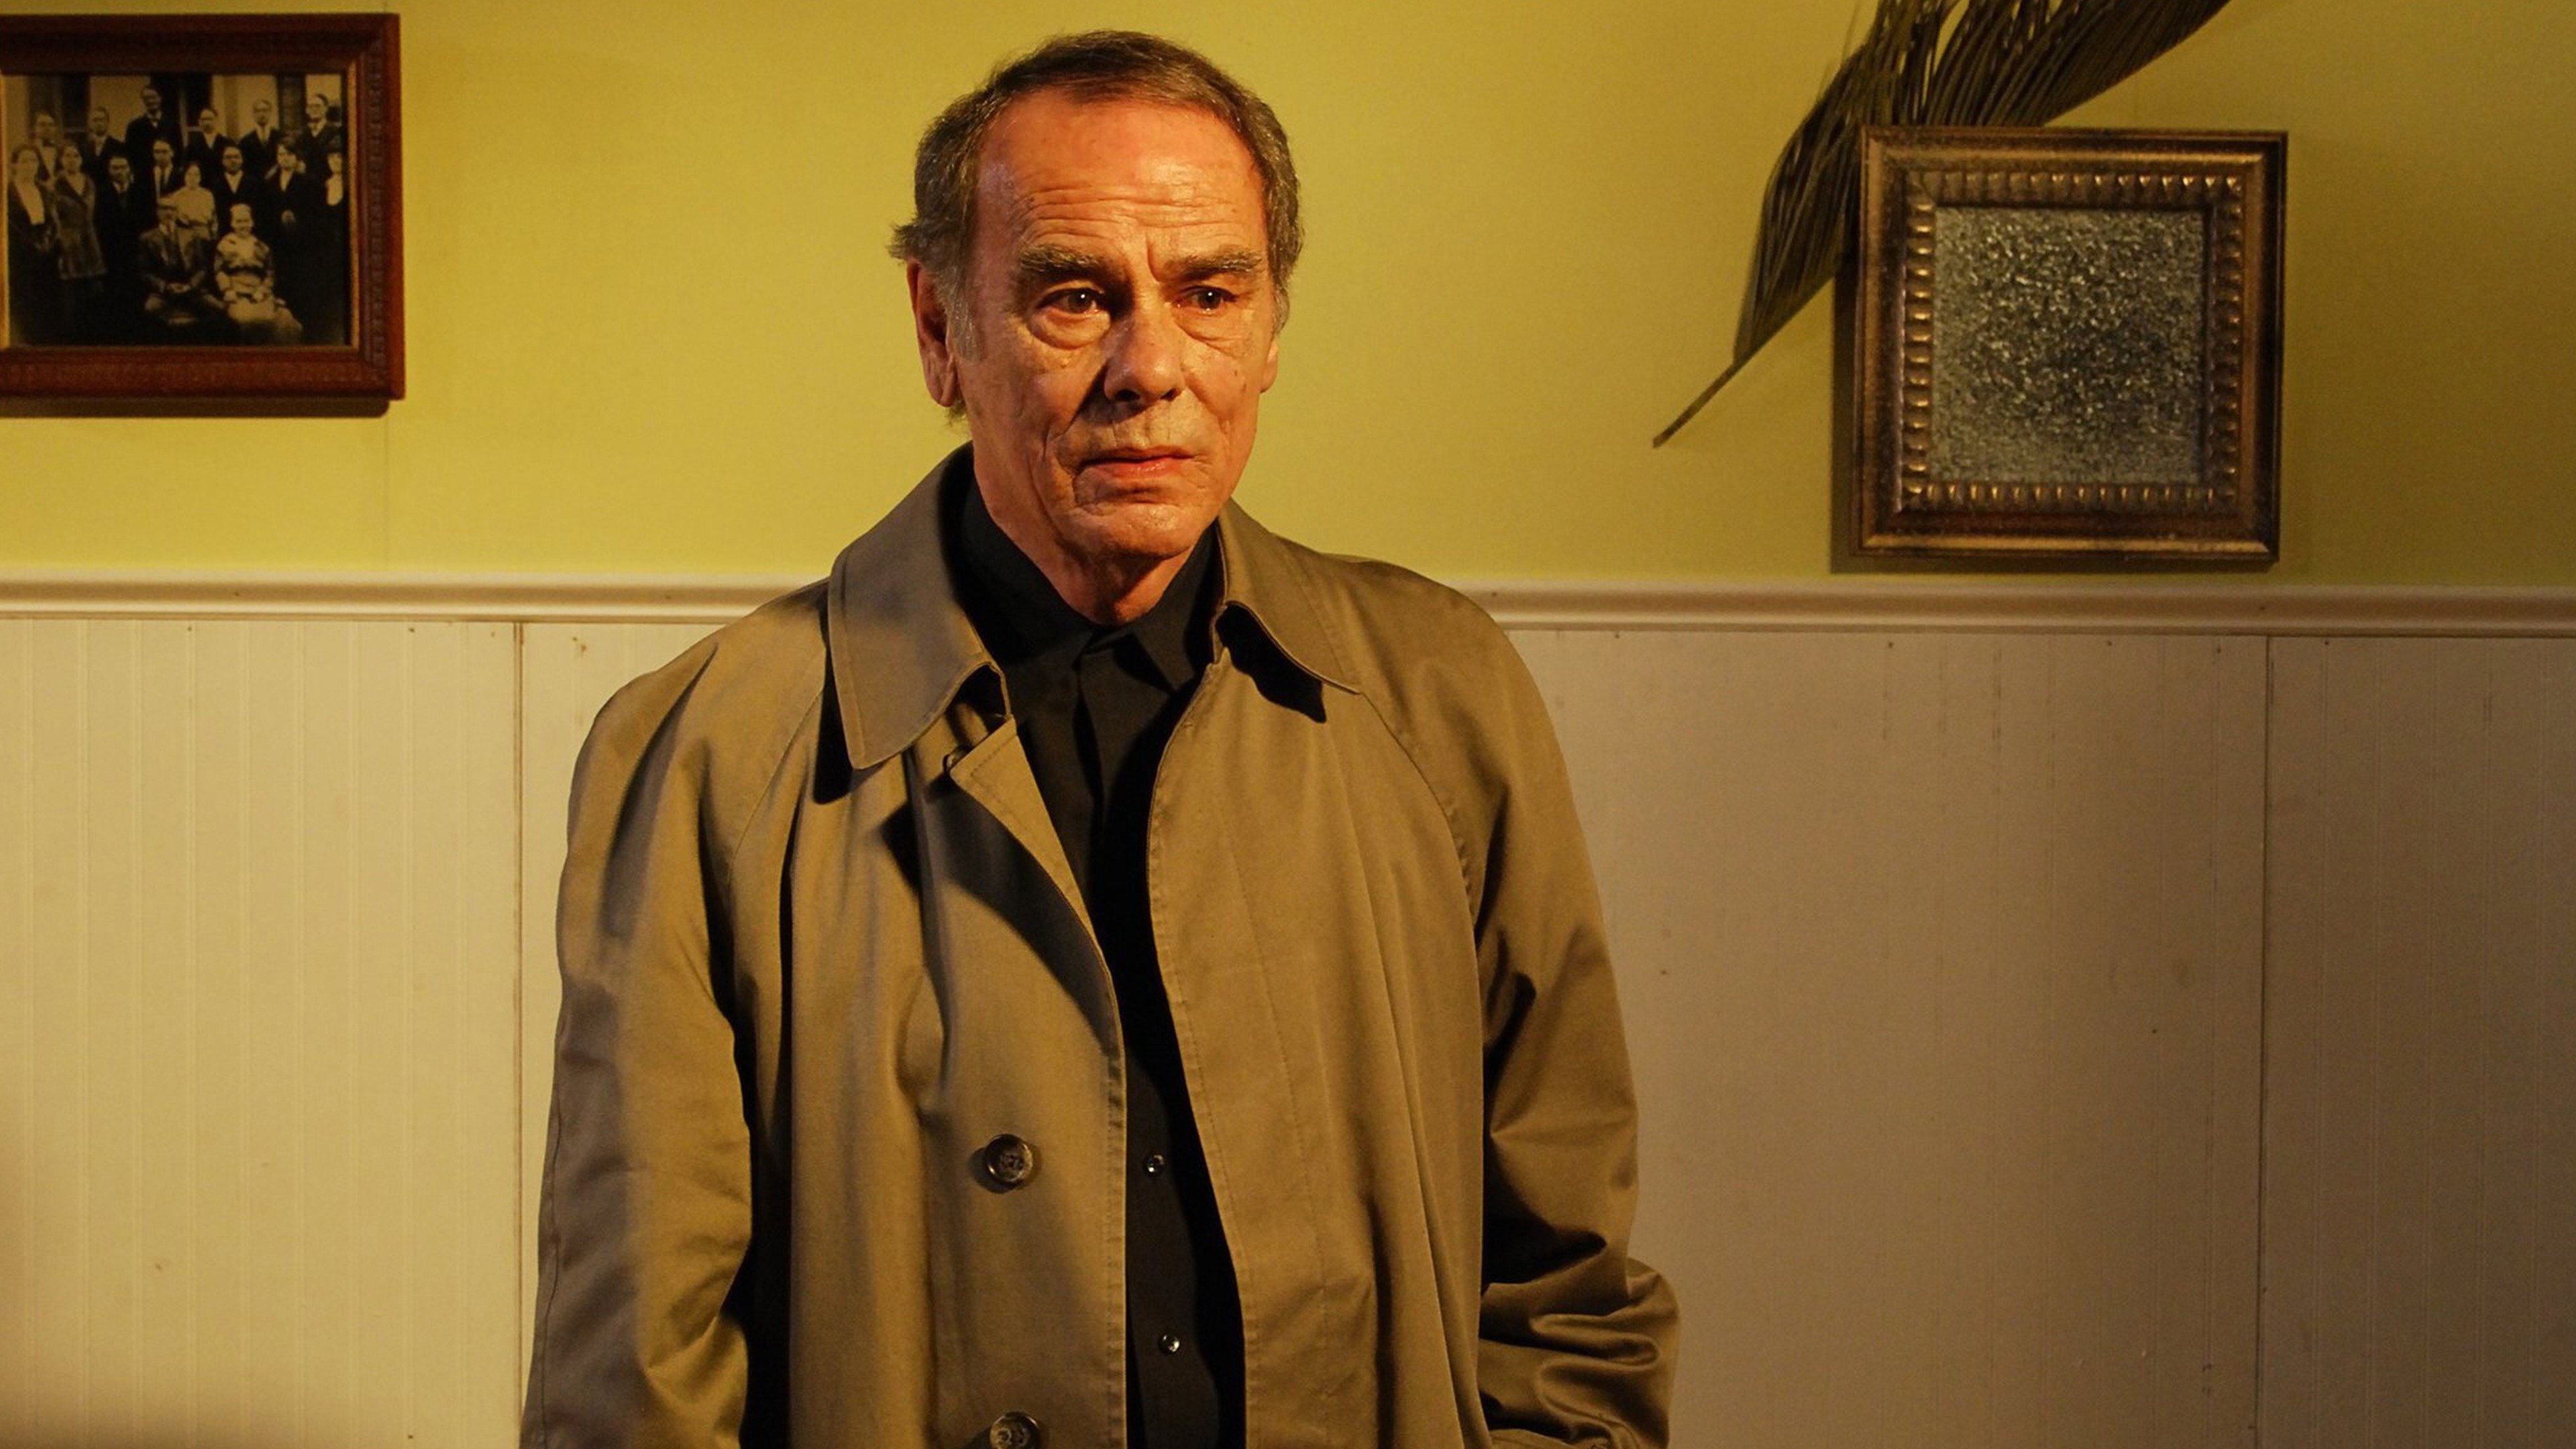 Dean Stockwell: The Dunwich Horror, A novel by American writer H. P. Lovecraft, Daniel Haller. 3840x2160 4K Background.